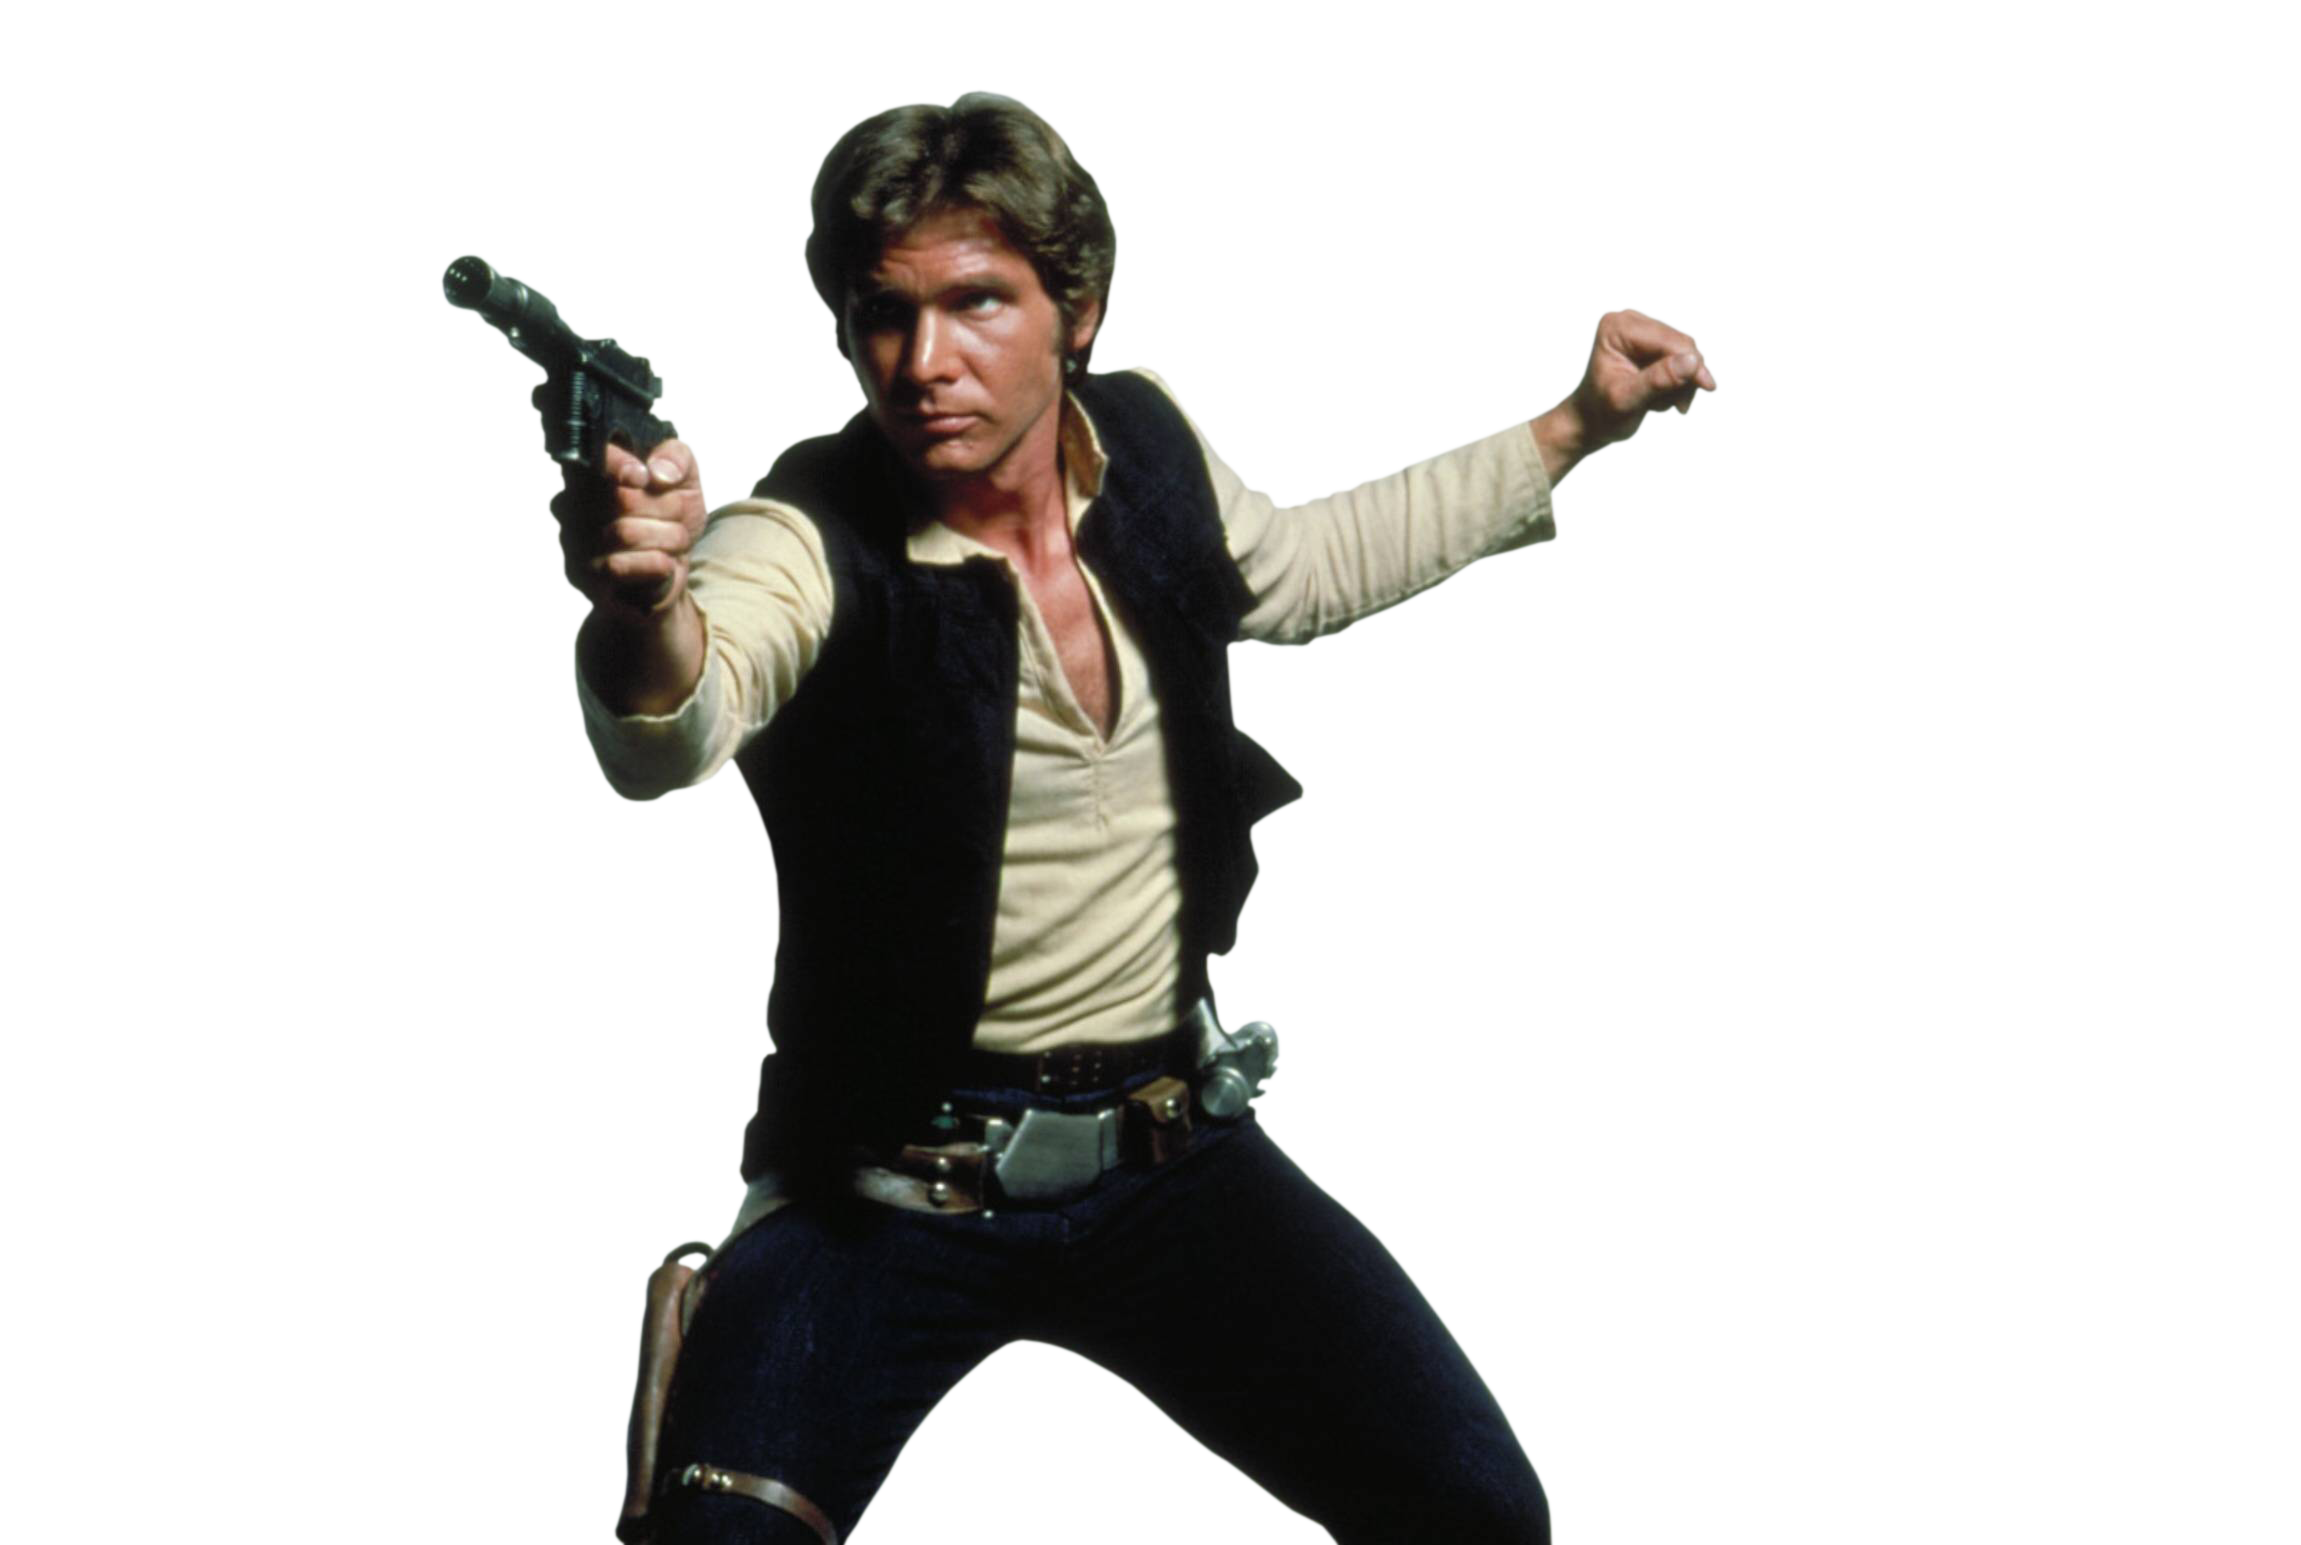 Star Wars Han Solo PNG High Quality Image